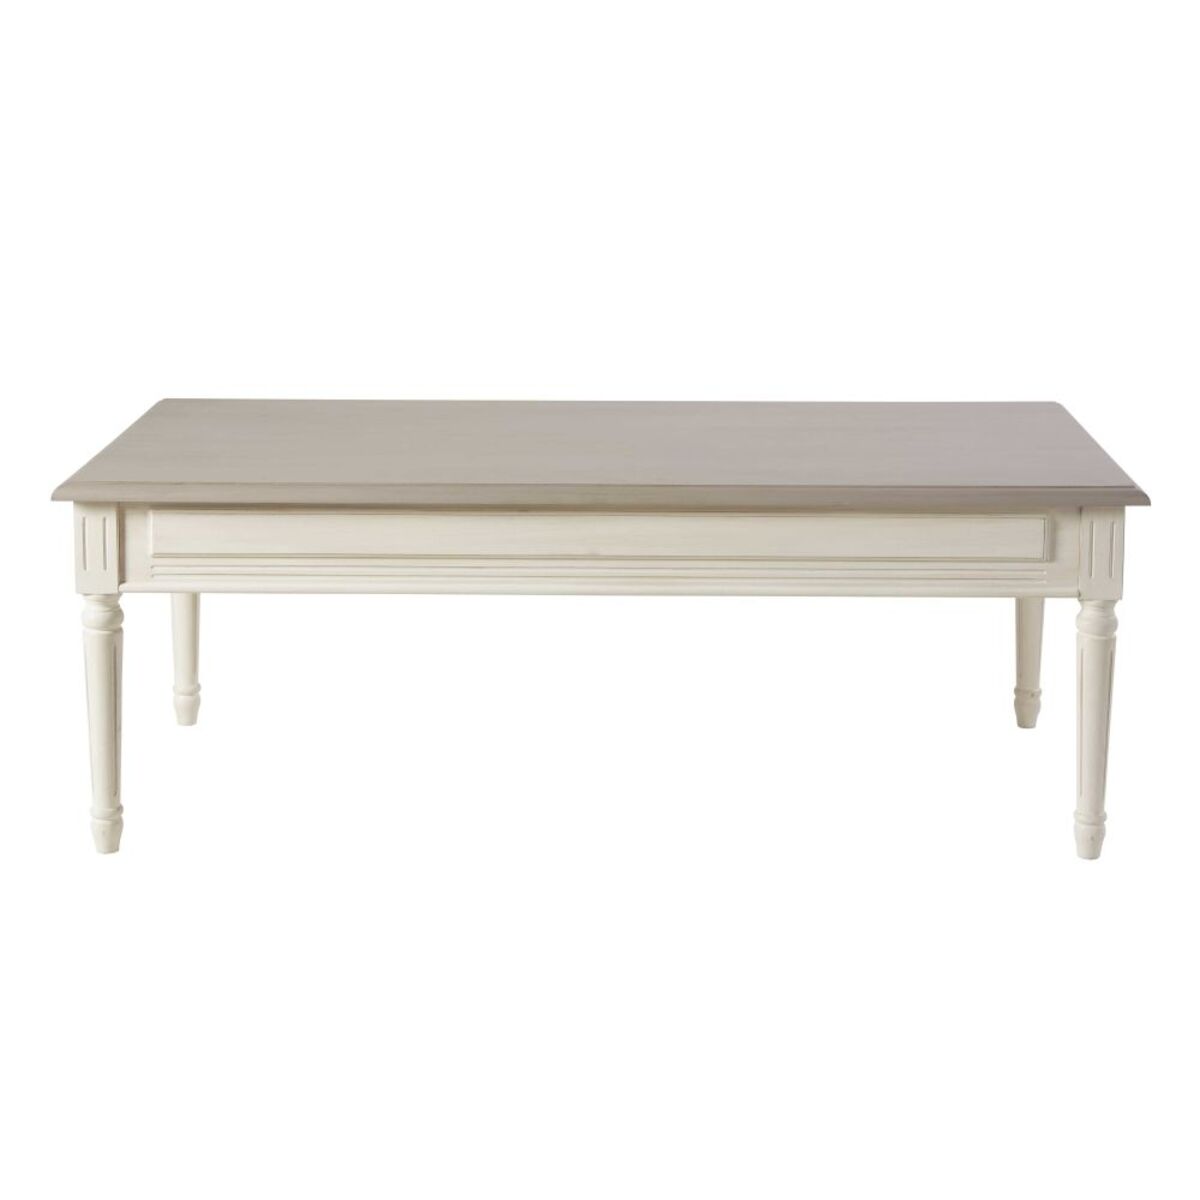 Table basse 2 tiroirs ivoire et taupe Camilla